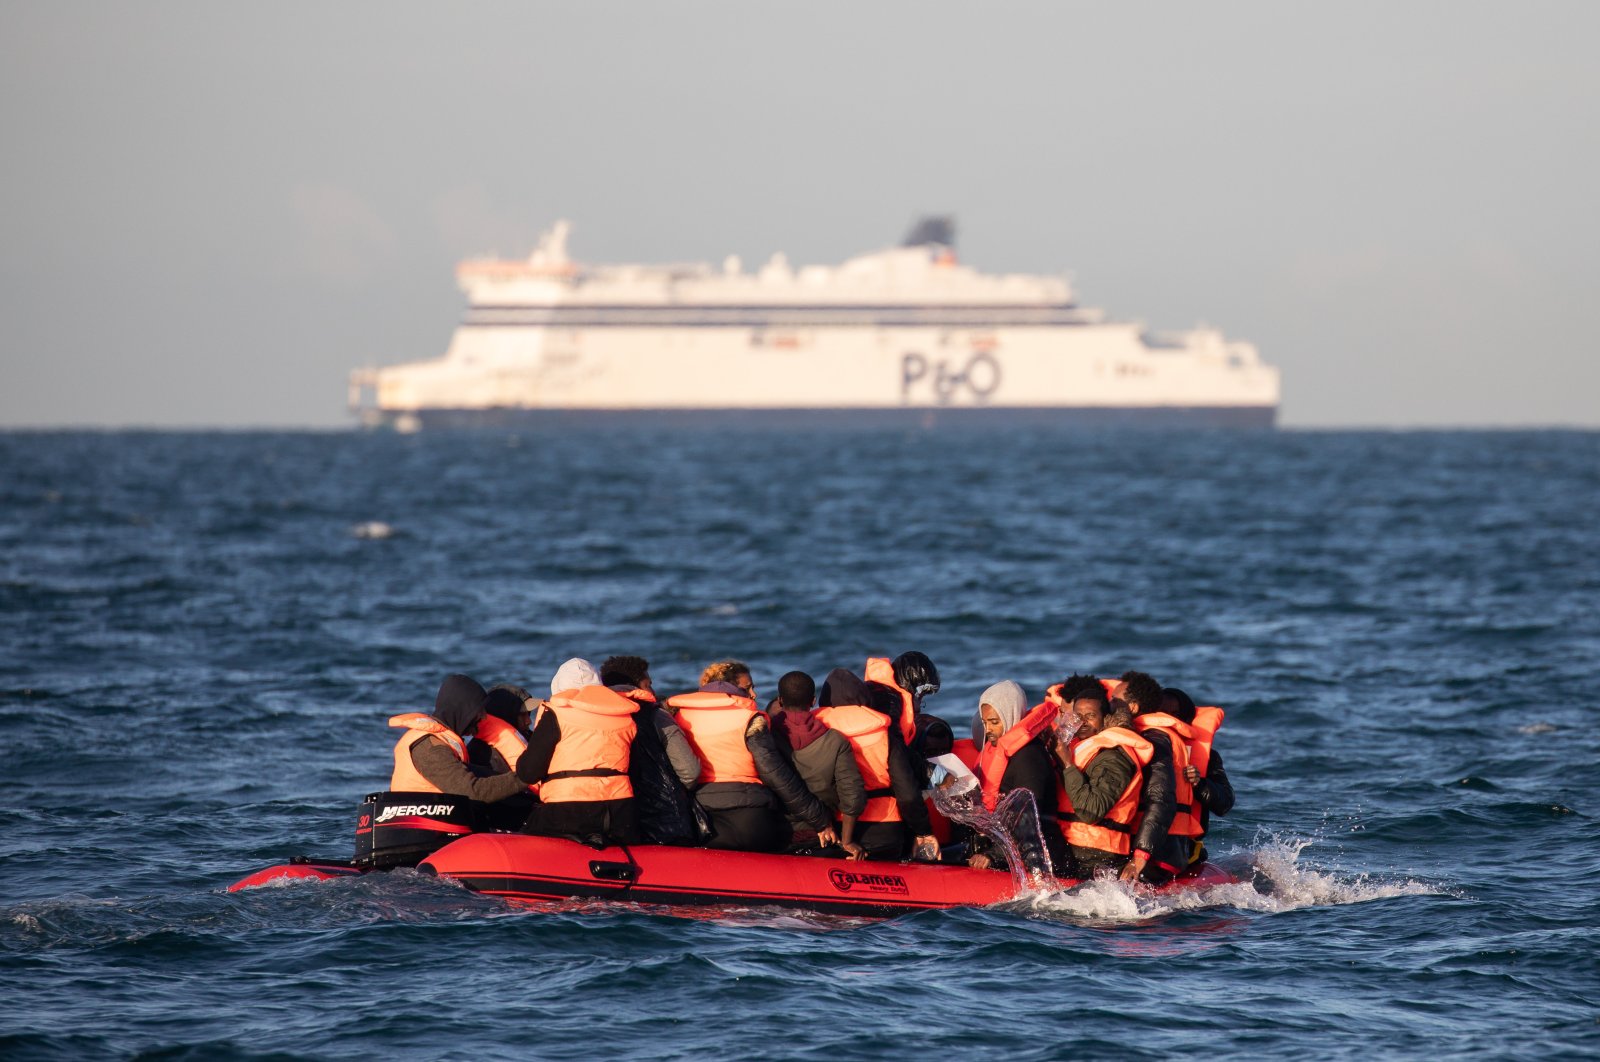 Migrants packed tightly onto a small inflatable boat bail water out as they attempt to cross the English Channel, Dover, U.K., Sept. 7, 2020. (Getty Images)